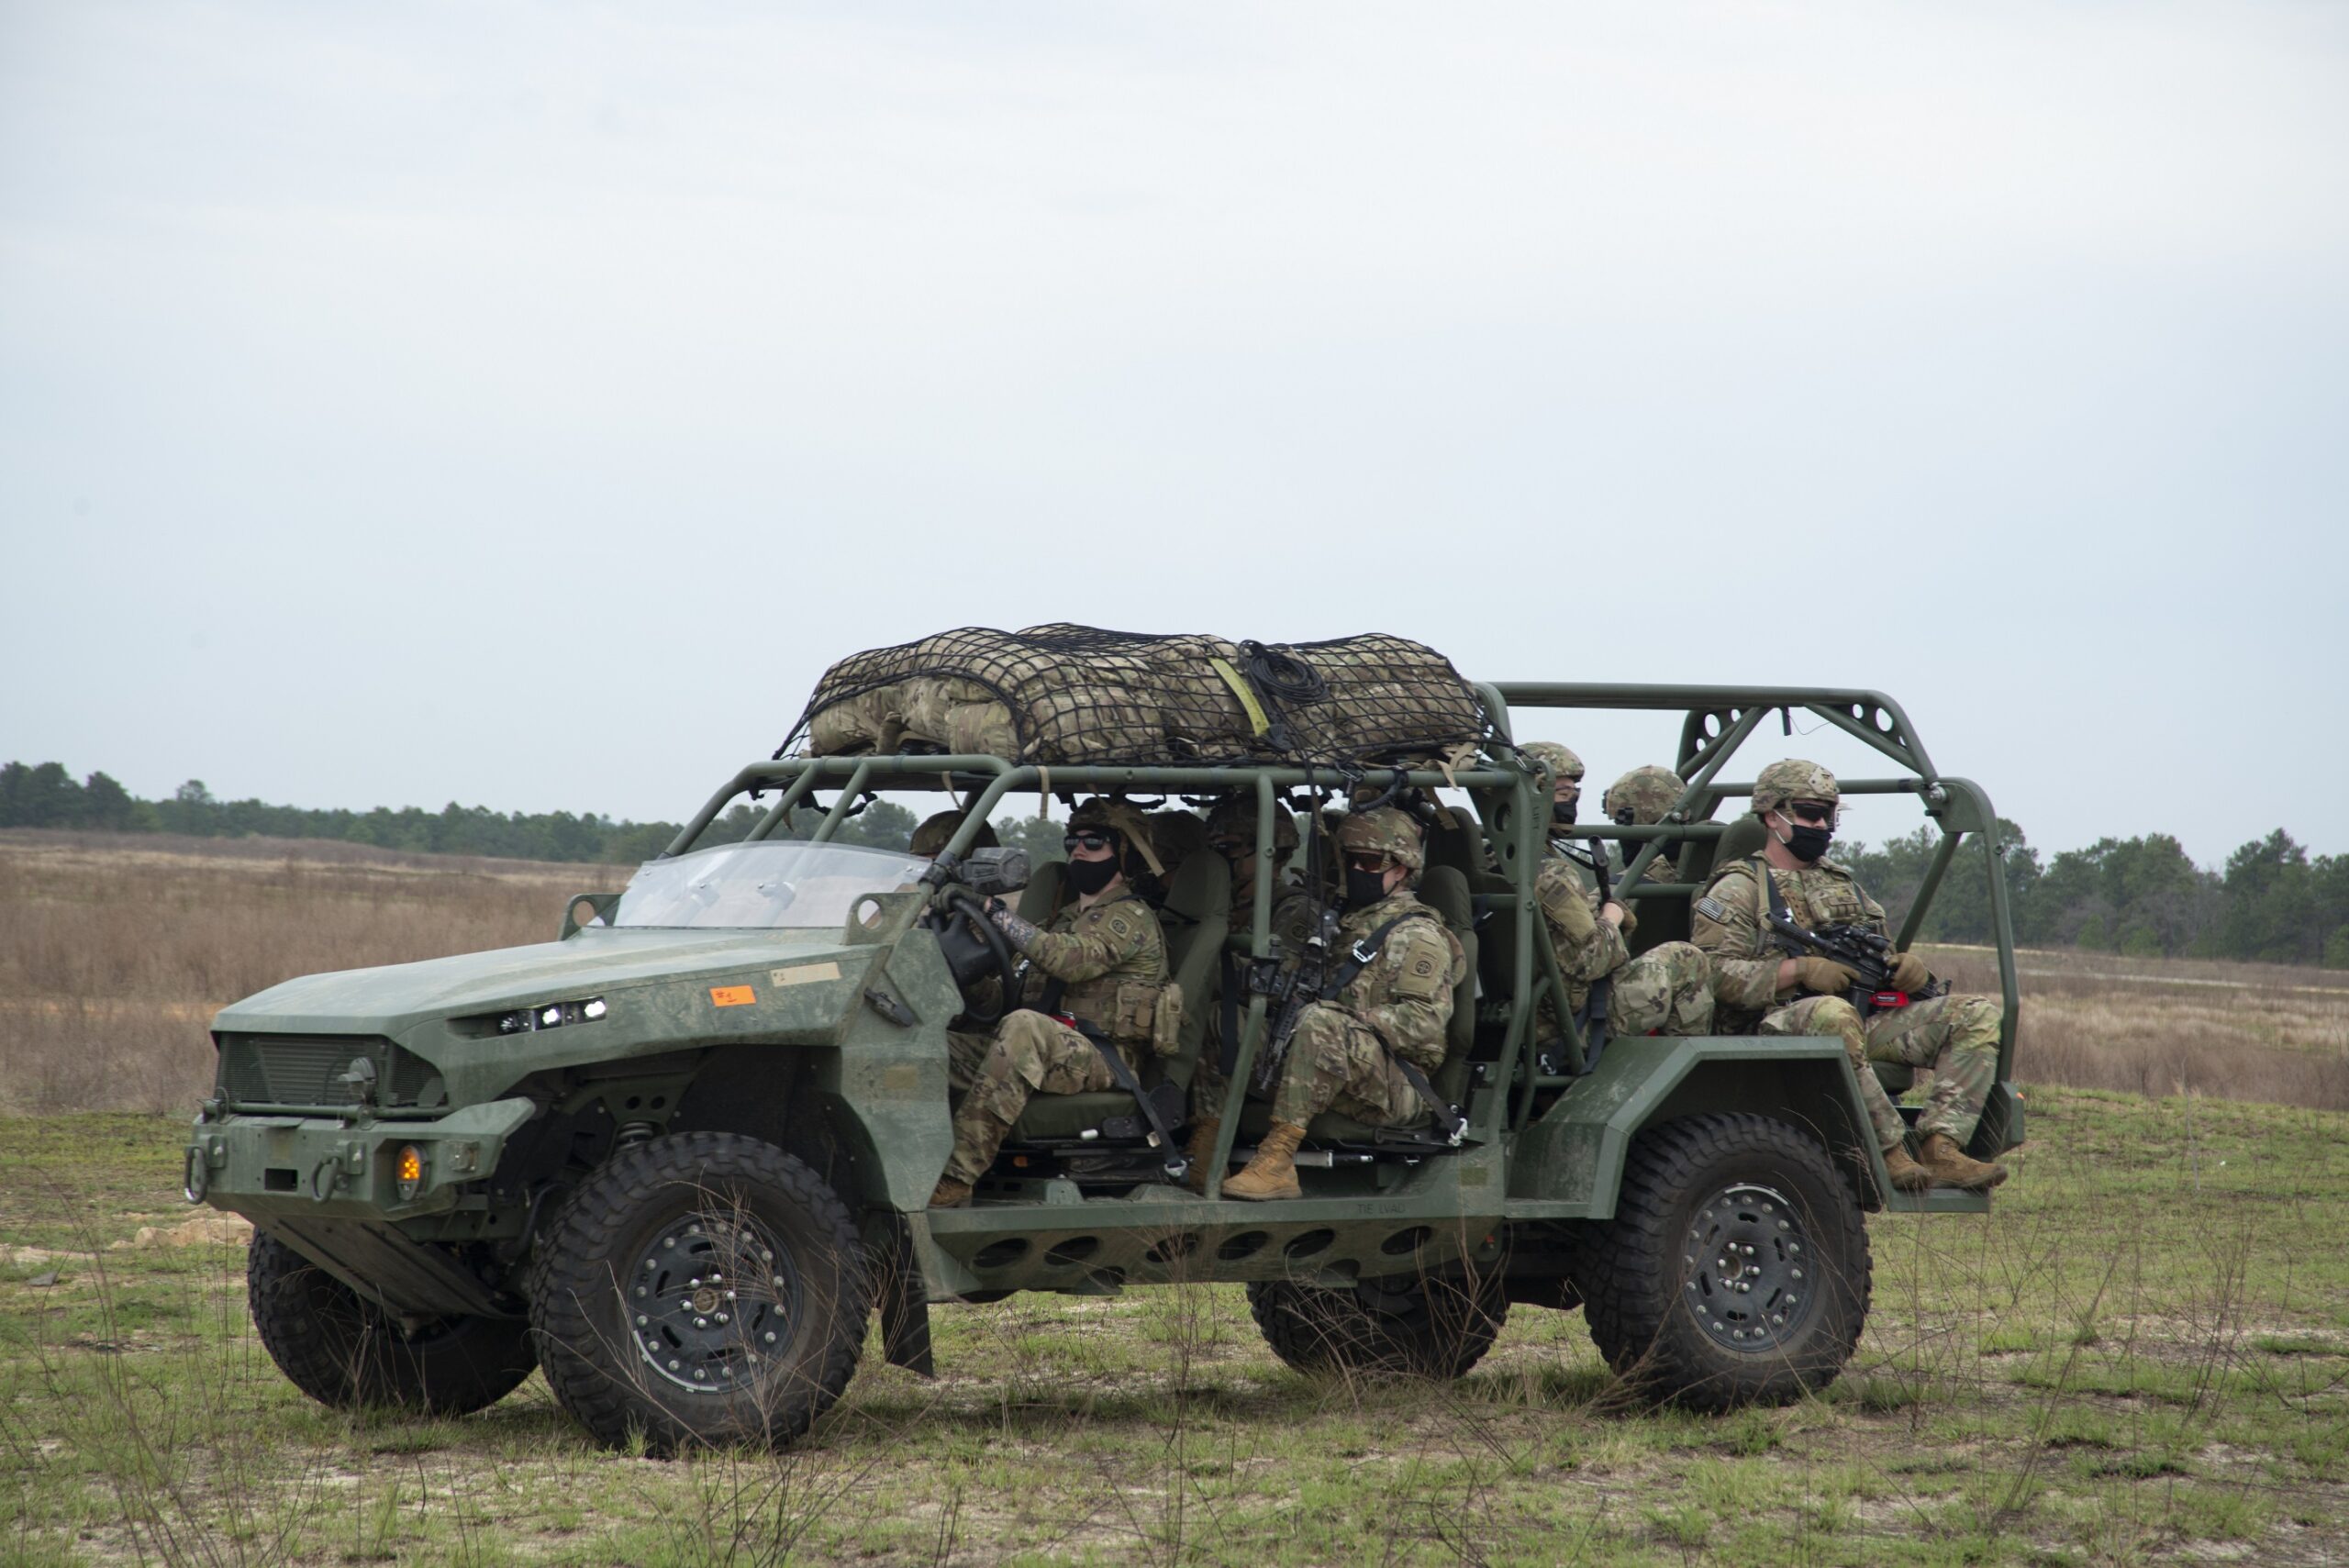 u-s-army-conduct-airdrop-tests-of-new-infantry-squad-vehicle-at-ft-bragg